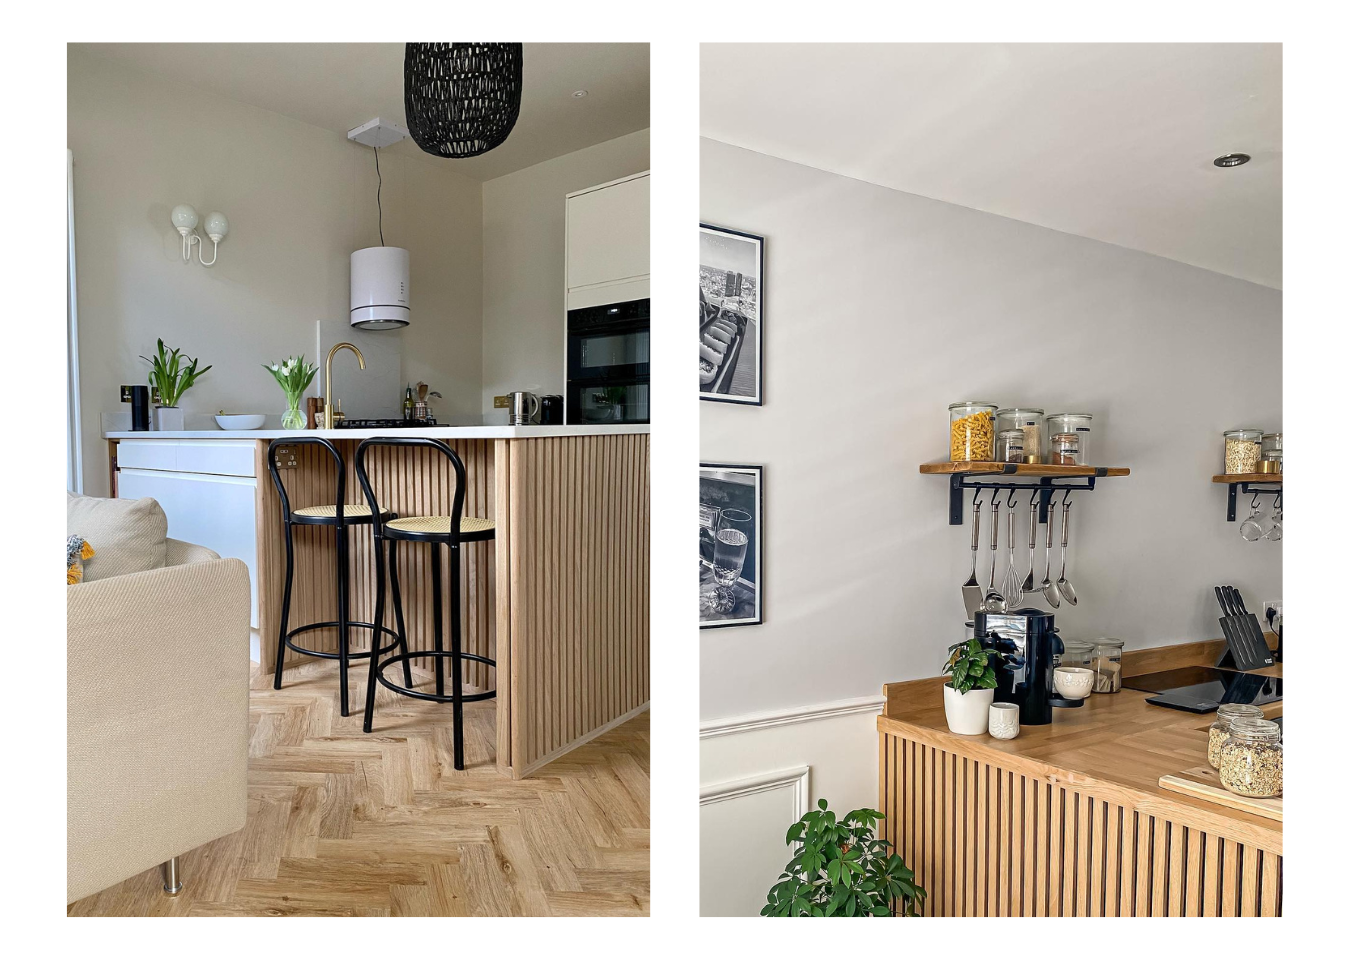 Two images. Left: Natural Oak SlatWall around a breakfast bar base with bar stools. Right: SlatWall natural oak panels seen around a breakfast bar base. Image shows corner of this with shelving on the wall holding jars of pasta.